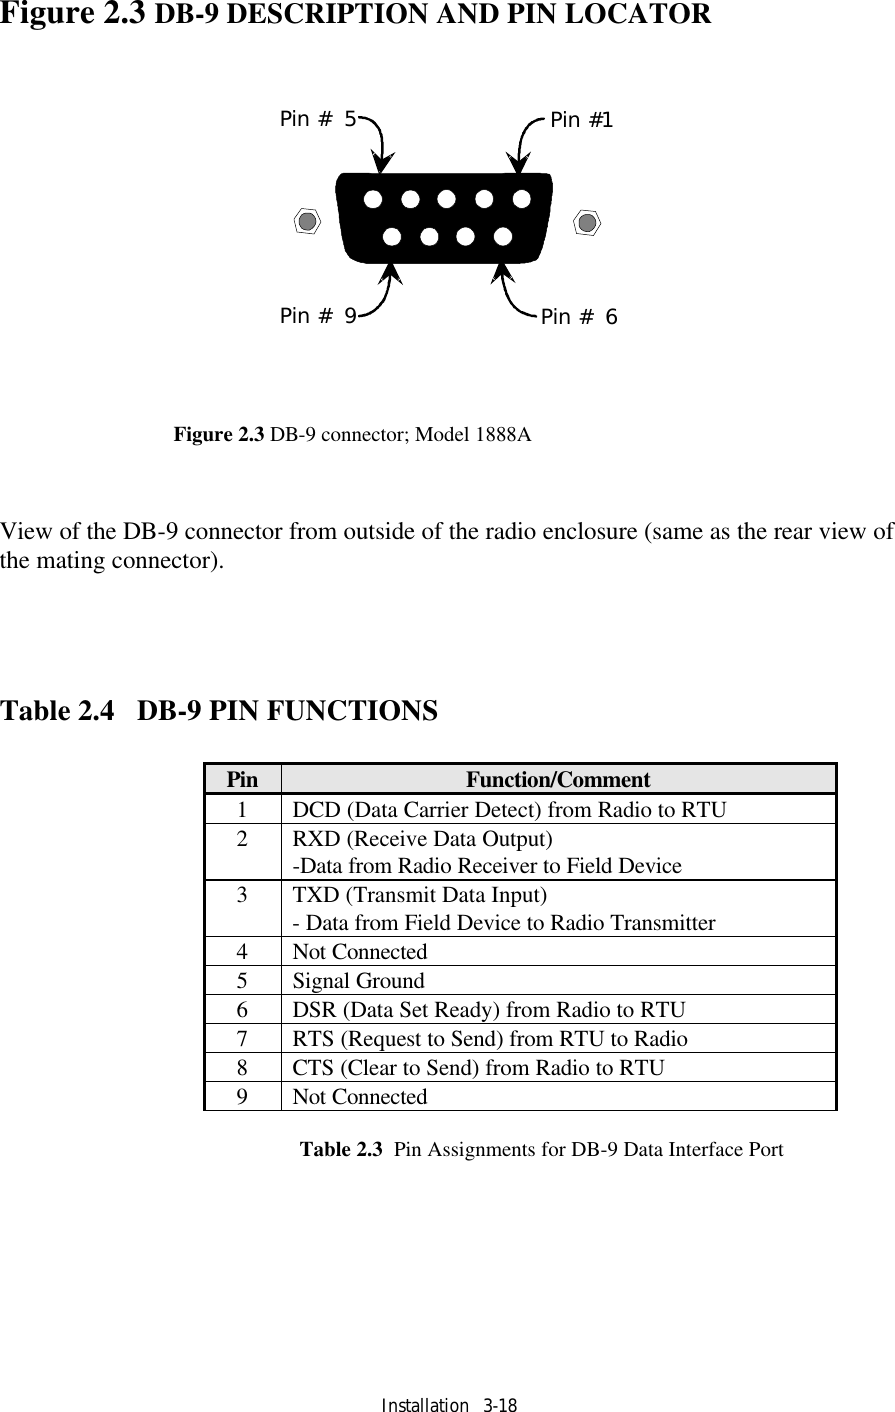 Installation   3-18 Figure 2.3 DB-9 DESCRIPTION AND PIN LOCATOR   Pin#1Pin#6Pin#9Pin#5   View of the DB-9 connector from outside of the radio enclosure (same as the rear view of the mating connector).       Table 2.4   DB-9 PIN FUNCTIONS   Pin Function/Comment 1 DCD (Data Carrier Detect) from Radio to RTU 2 RXD (Receive Data Output) -Data from Radio Receiver to Field Device 3 TXD (Transmit Data Input)  - Data from Field Device to Radio Transmitter 4 Not Connected 5 Signal Ground 6 DSR (Data Set Ready) from Radio to RTU 7 RTS (Request to Send) from RTU to Radio 8  CTS (Clear to Send) from Radio to RTU 9 Not Connected  Table 2.3  Pin Assignments for DB-9 Data Interface Port   Figure 2.3 DB-9 connector; Model 1888A 